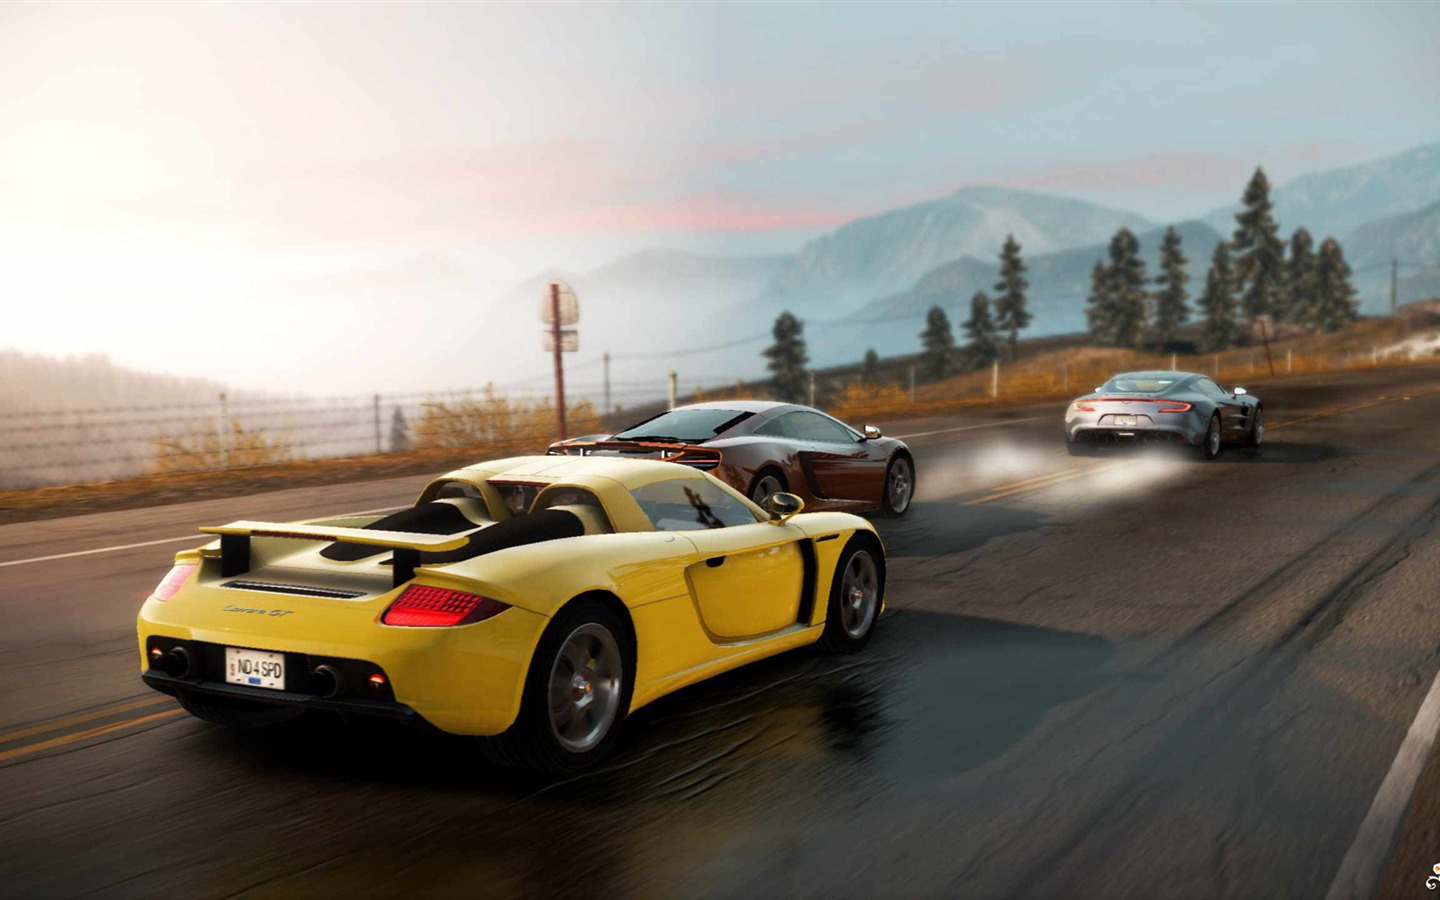 Need for Speed: Hot Pursuit 极品飞车14：热力追踪6 - 1440x900